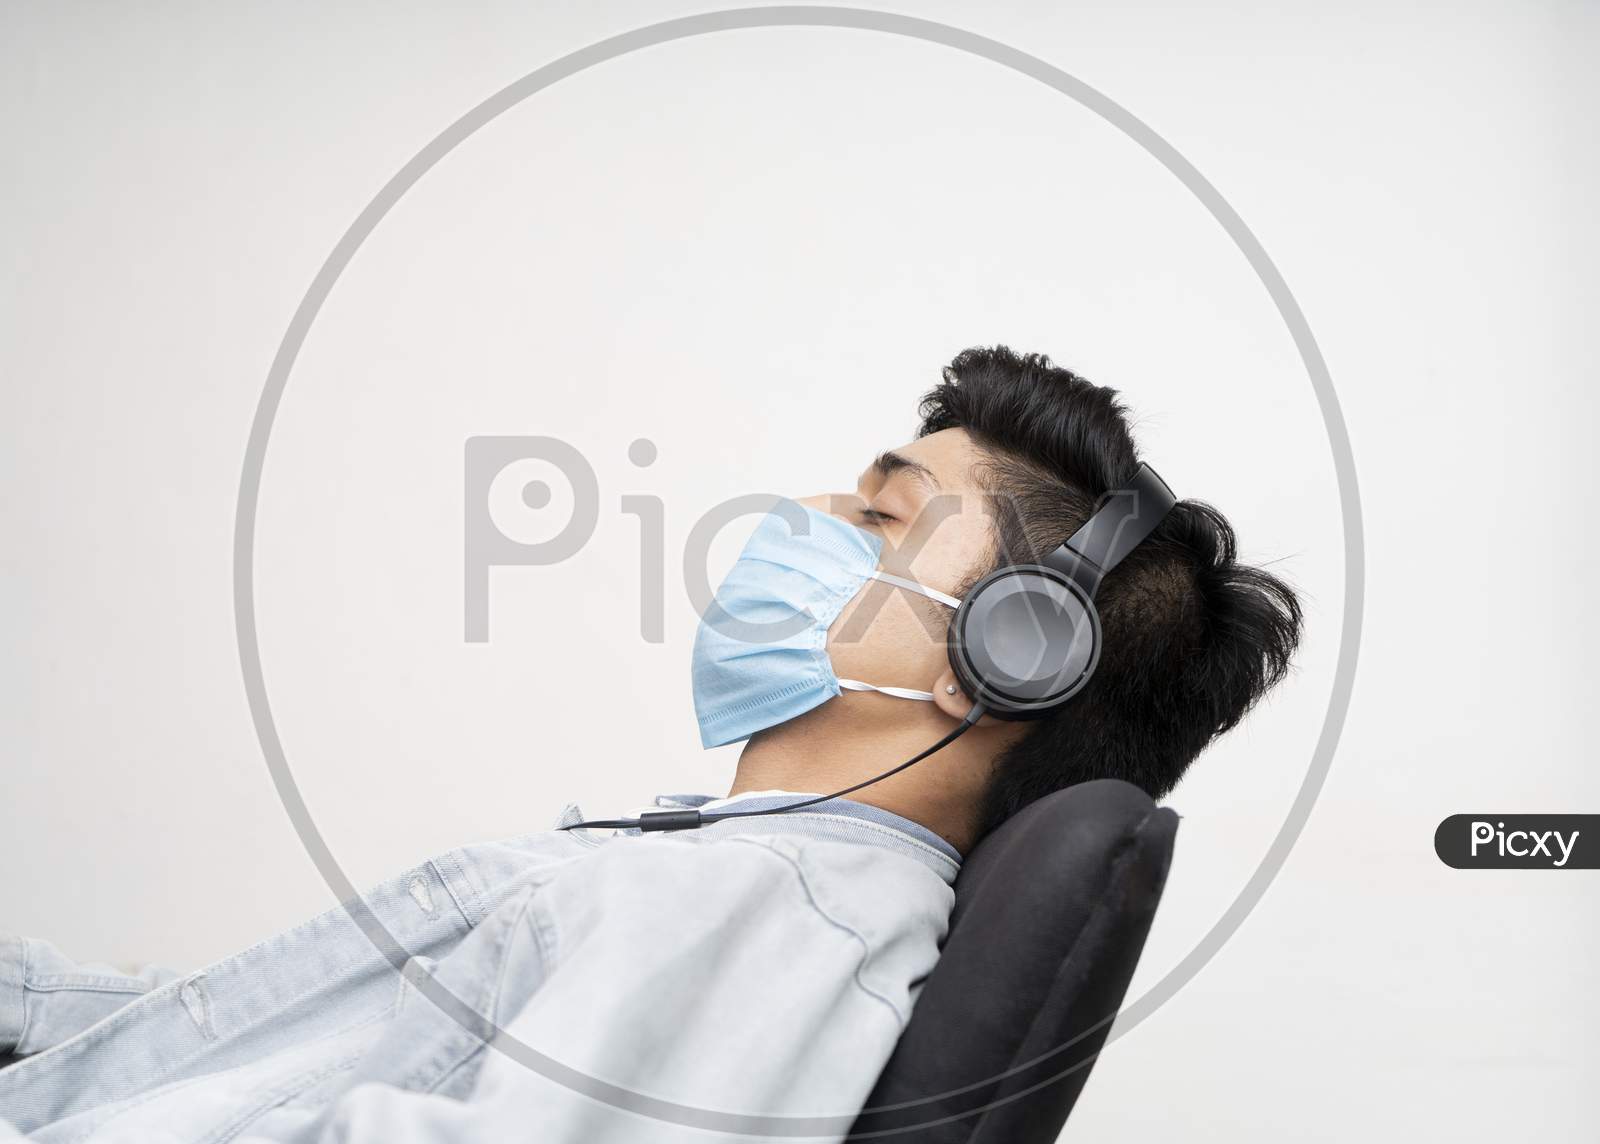 Vyoung Asian Boy Wearing A Blue Surgical Mask For Protection From Covid-19, Sleeping On A Chair While Listening To Music.